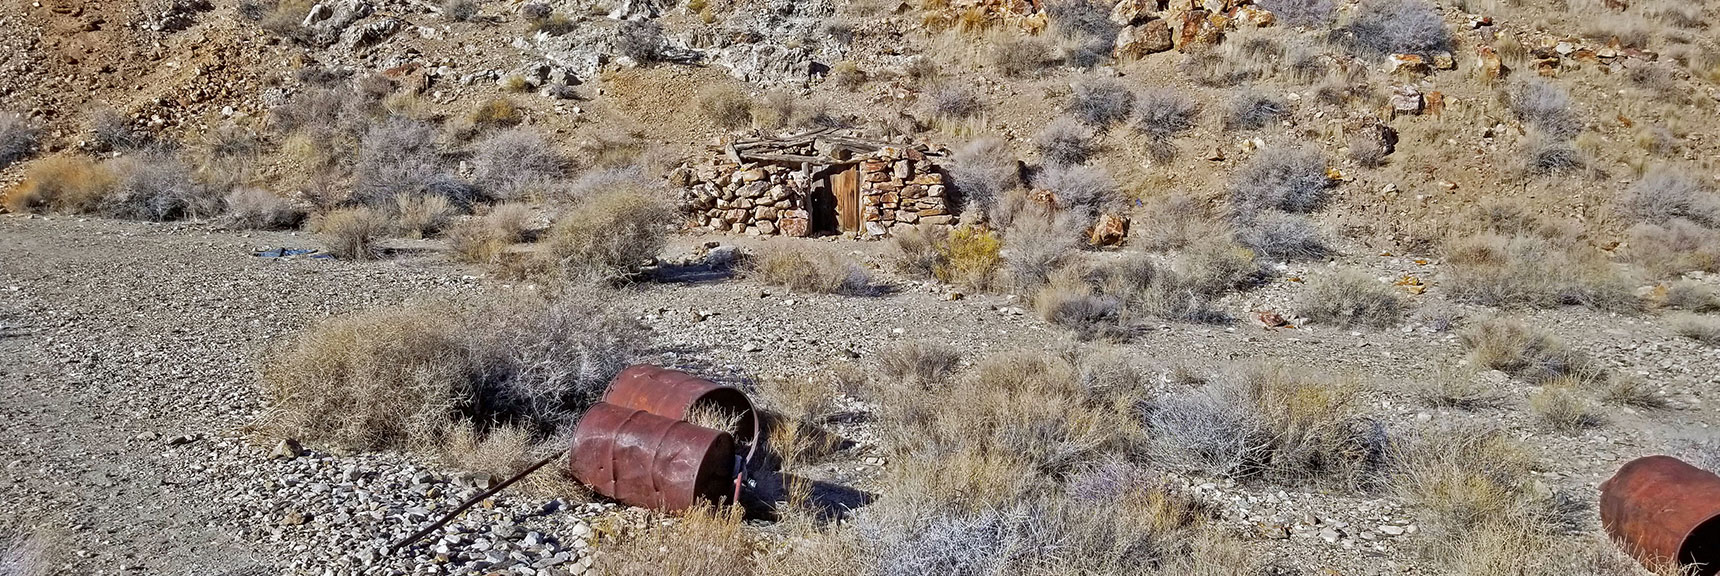 Storage Area and Old Gas or Water Cans Near Eureka Mine | Eureka Mine, Harrisburg, Cashier Mill, Death Valley, California